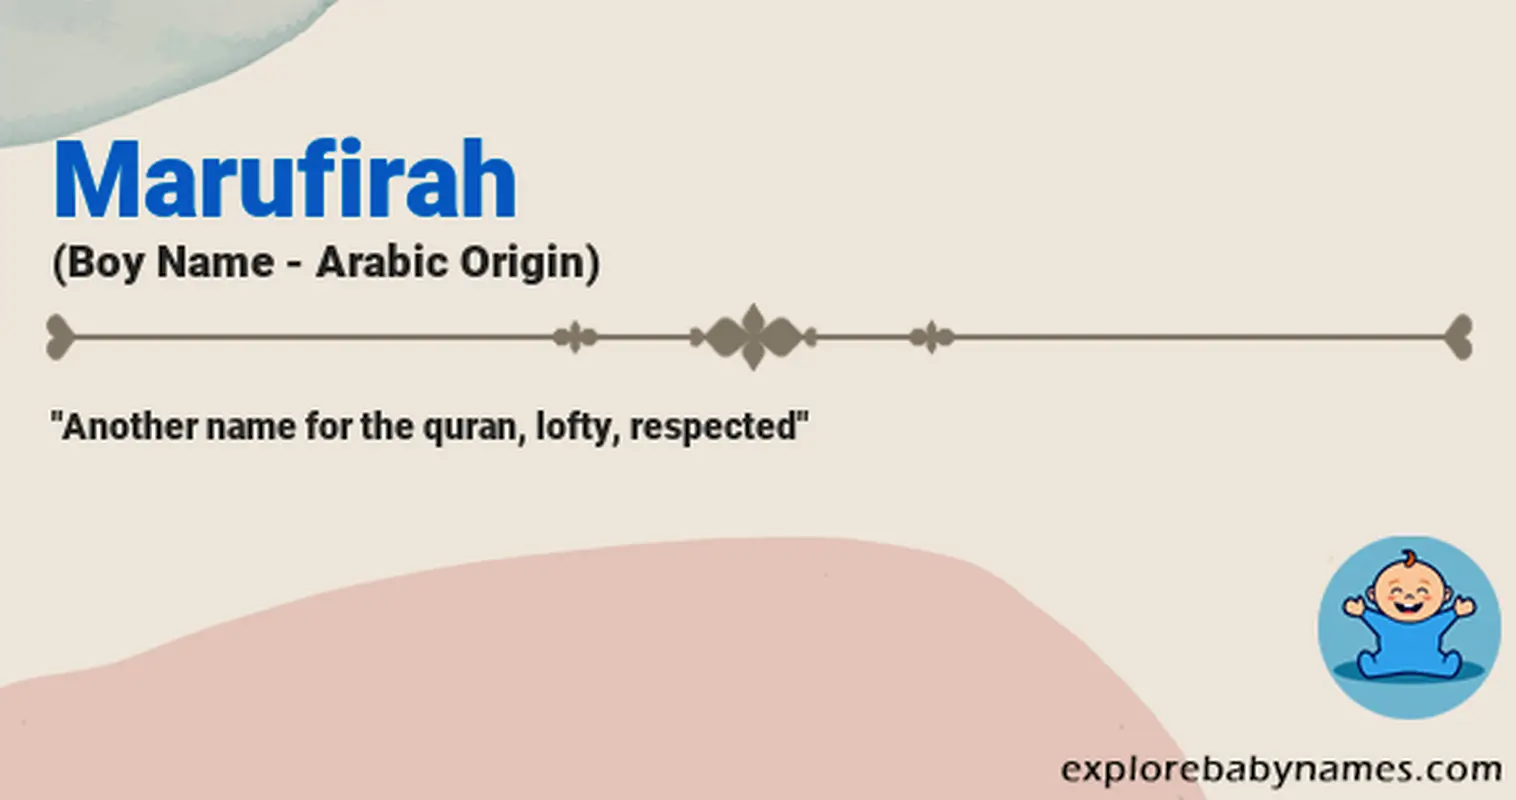 Meaning of Marufirah